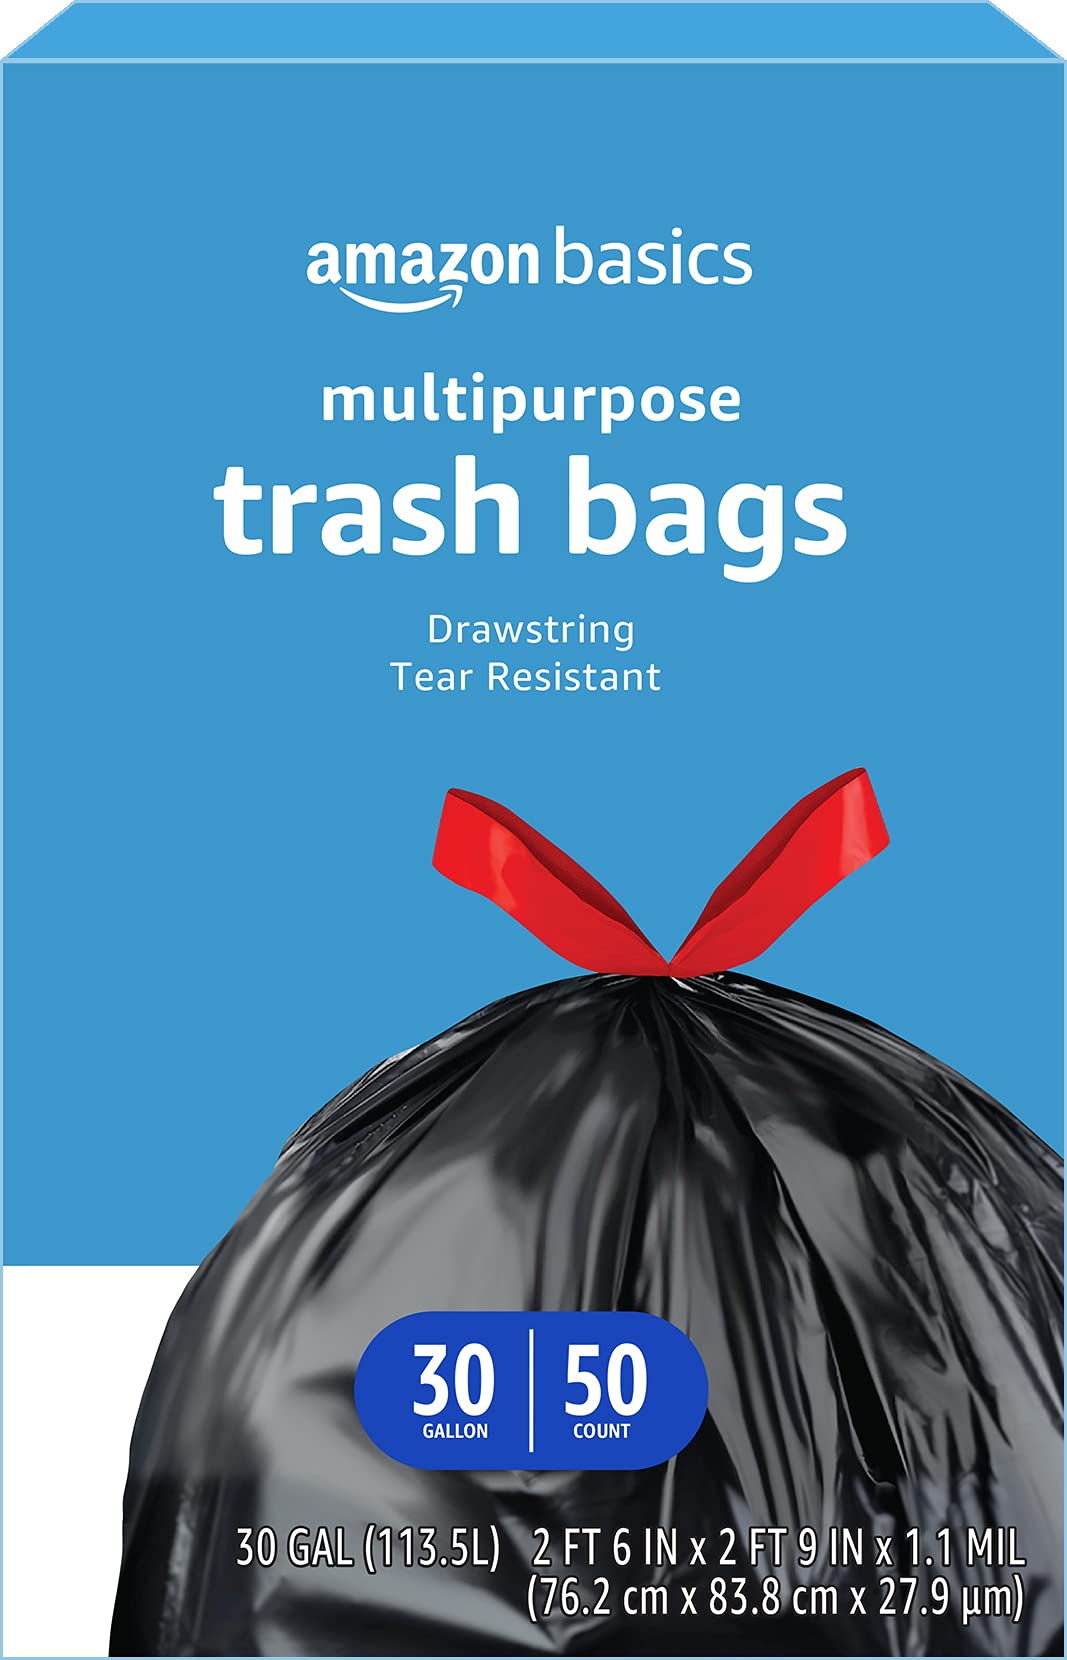 50-Count 30-Gallon Amazon Basics Multipurpose Drawstring Trash Bags (Unscented) $7.00 w/S&S + Free Shipping w/ Prime or on orders $25+